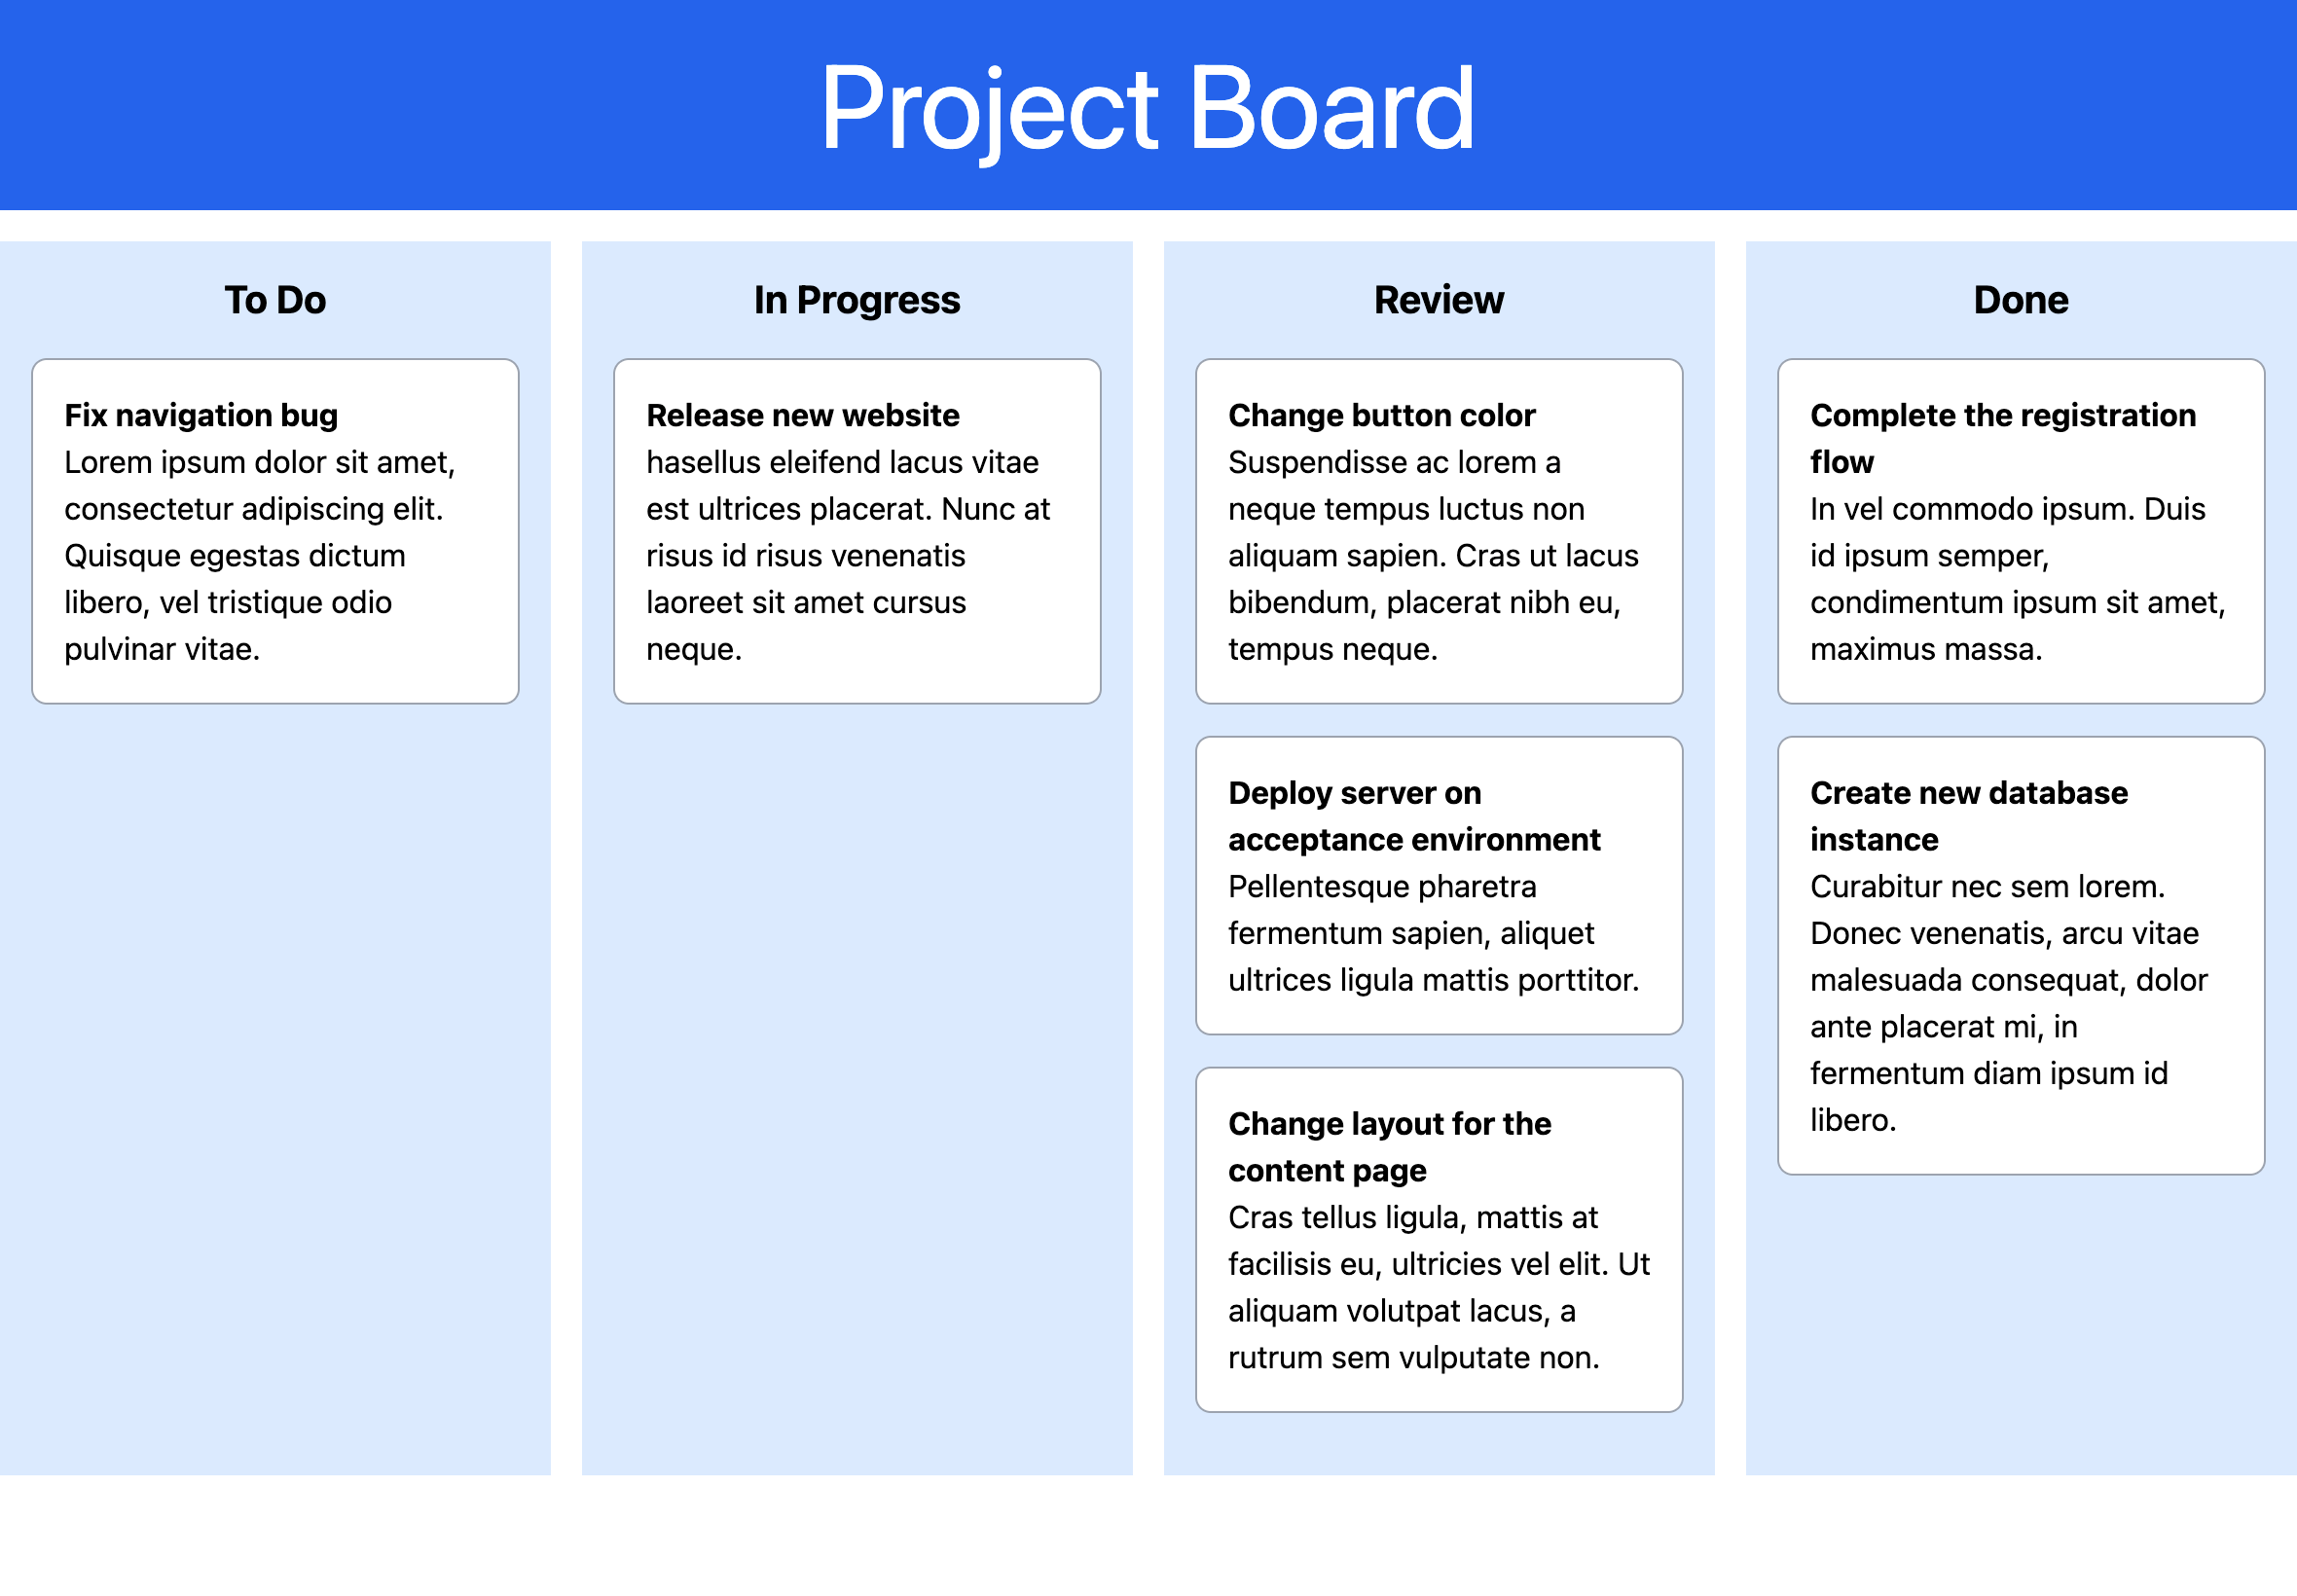 Project Board with Tailwind CSS completed